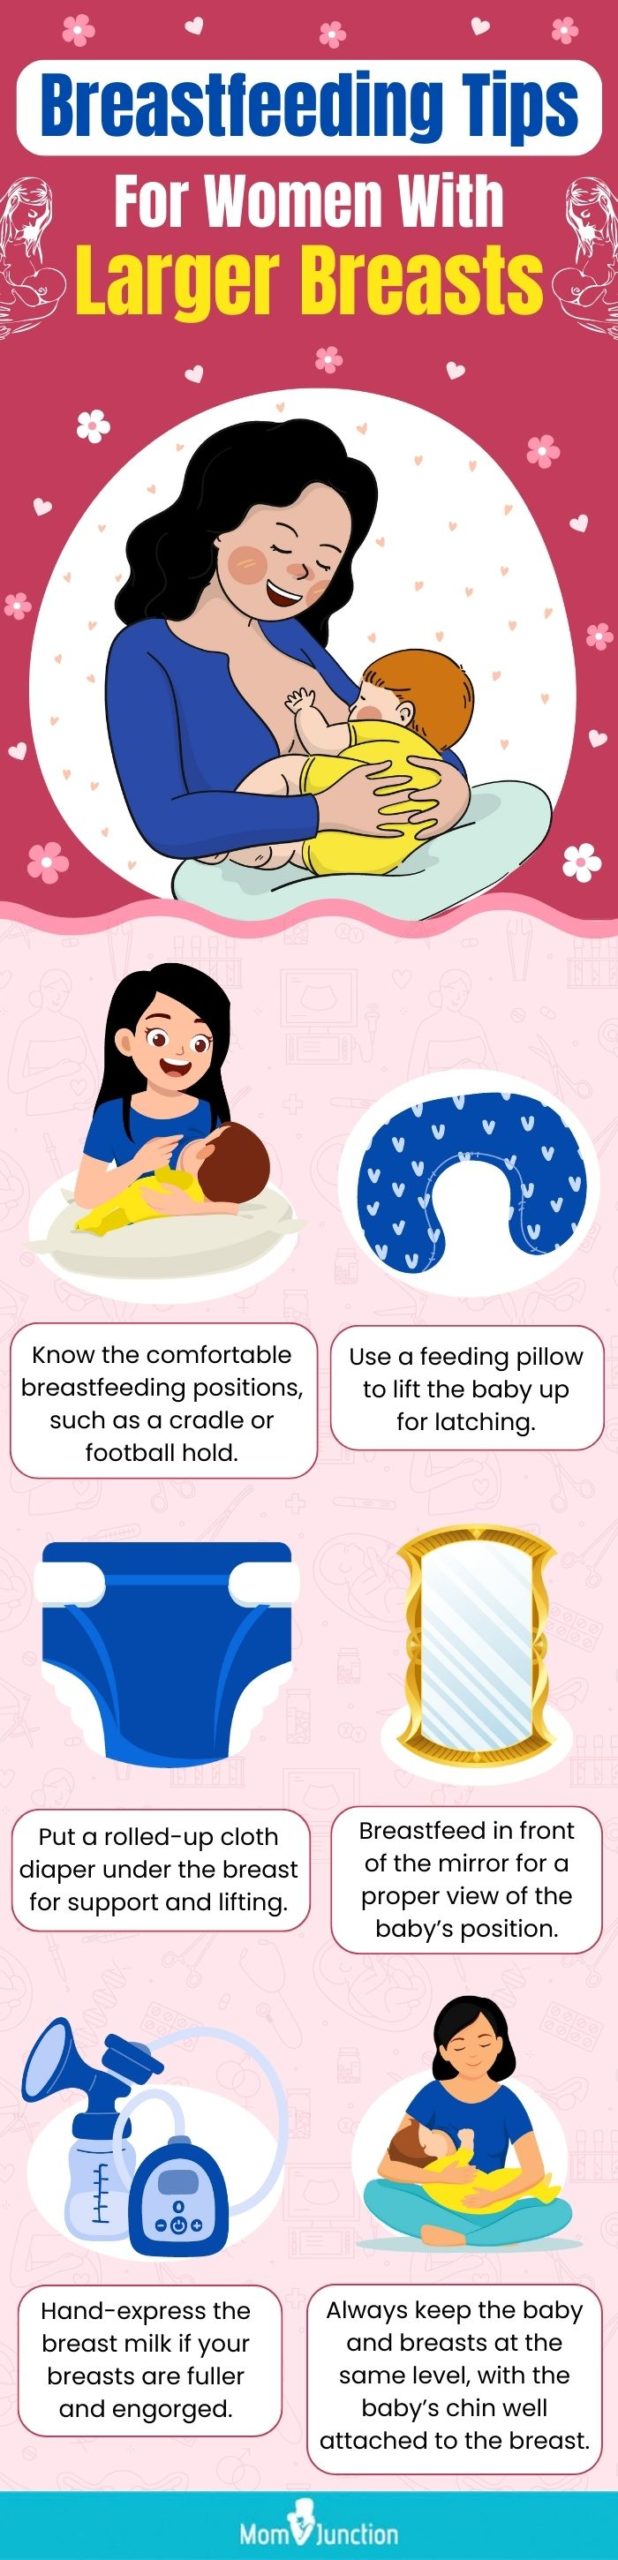 11 Must-haves for sucessful breastfeeding